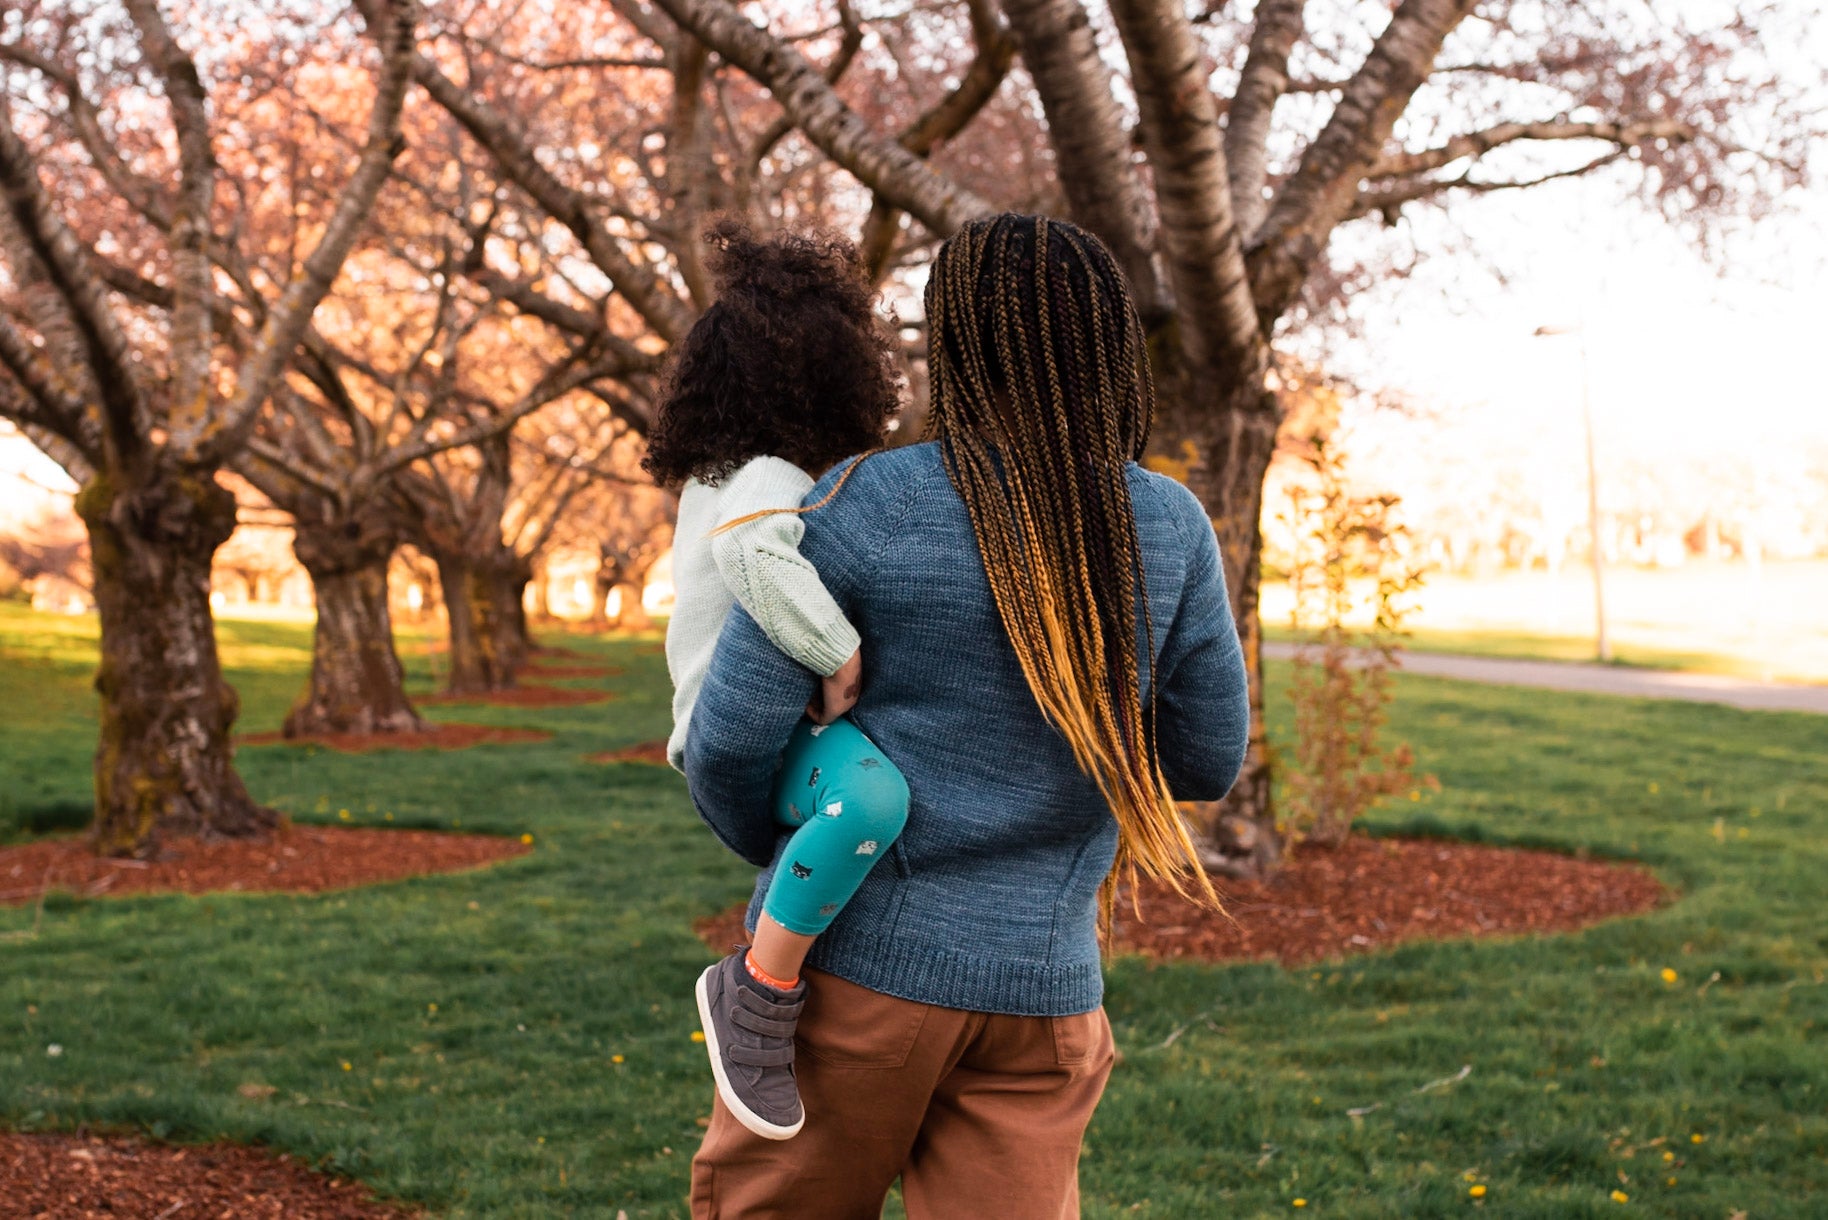 Seen from behind, Rachel carries Mia through a park. They wear matching hand knit sweaters with subtle cable detailing. Rachel's sweater is knit in blue yarn, and Mia's in cream.